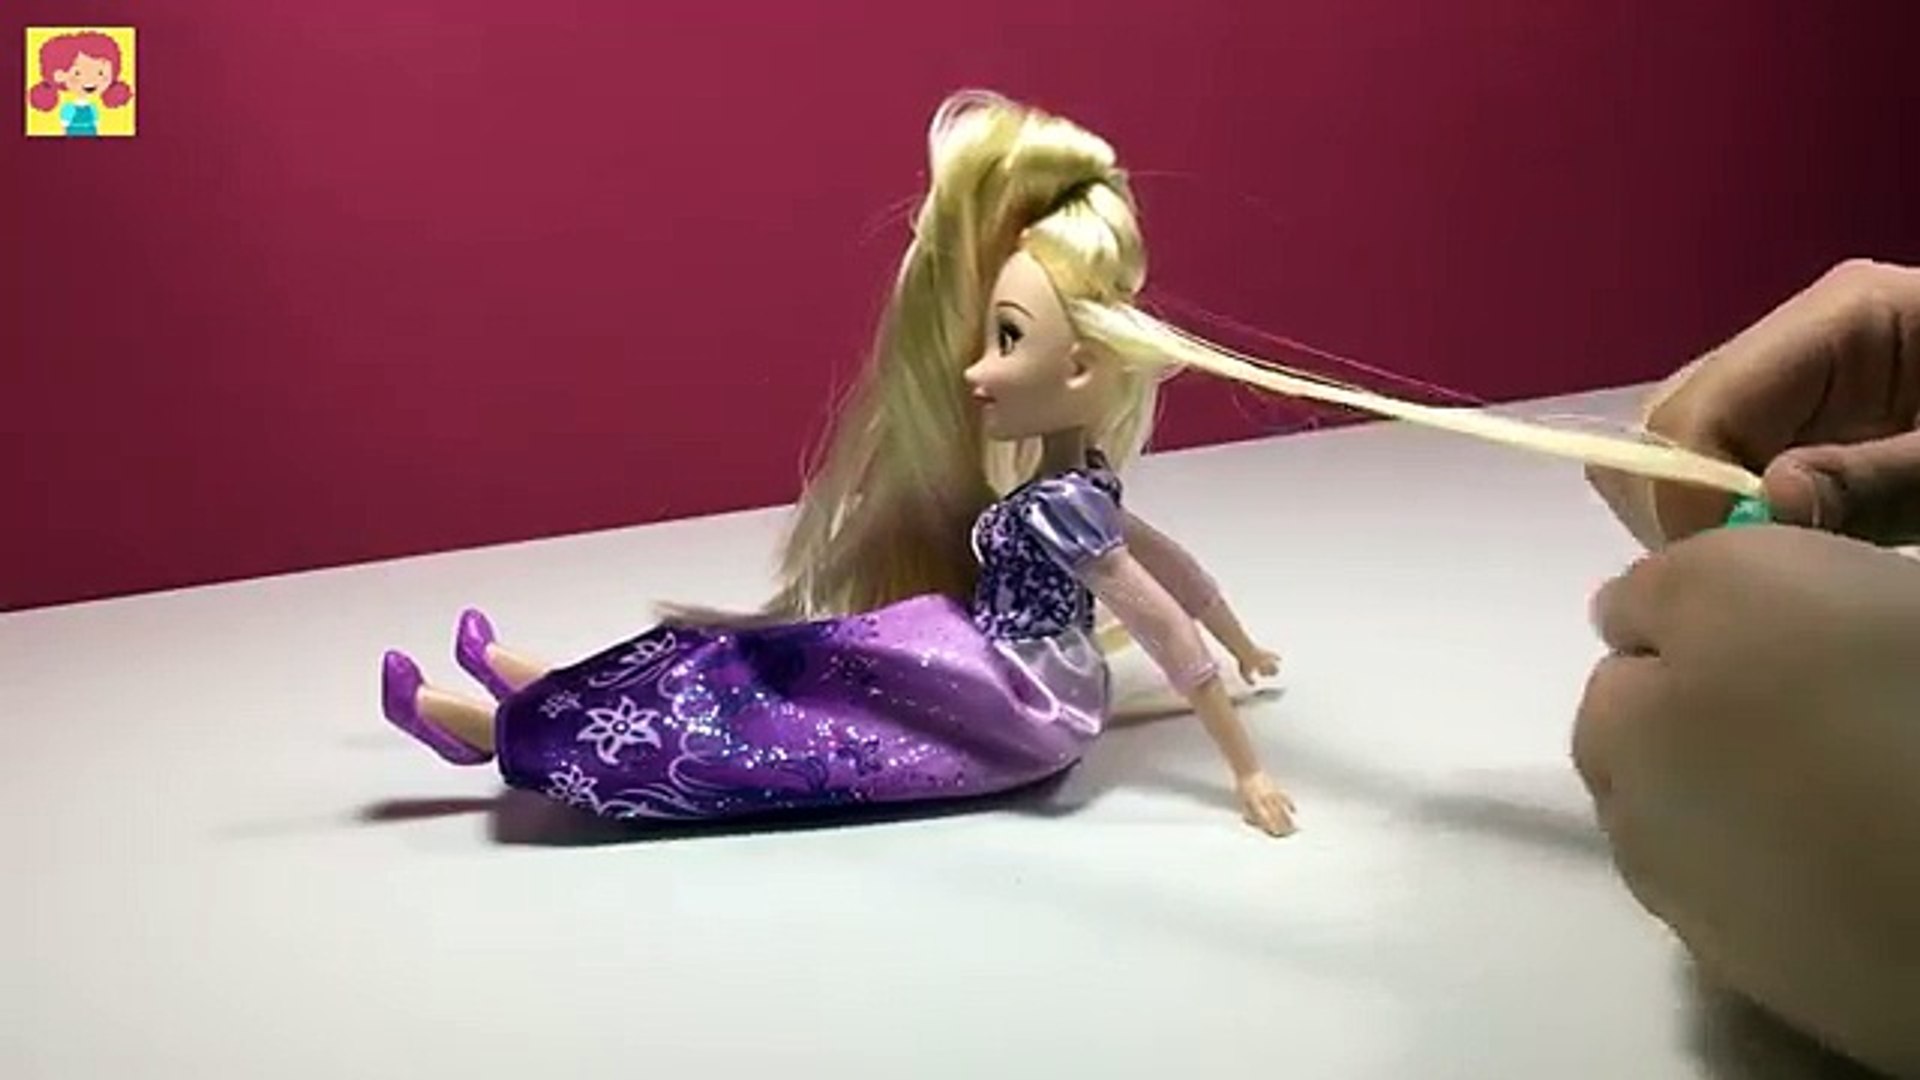 Disney Rapunzel Doll Hairstyles - How to Make Waterfall Braid for Dolls -  Dailymotion Video